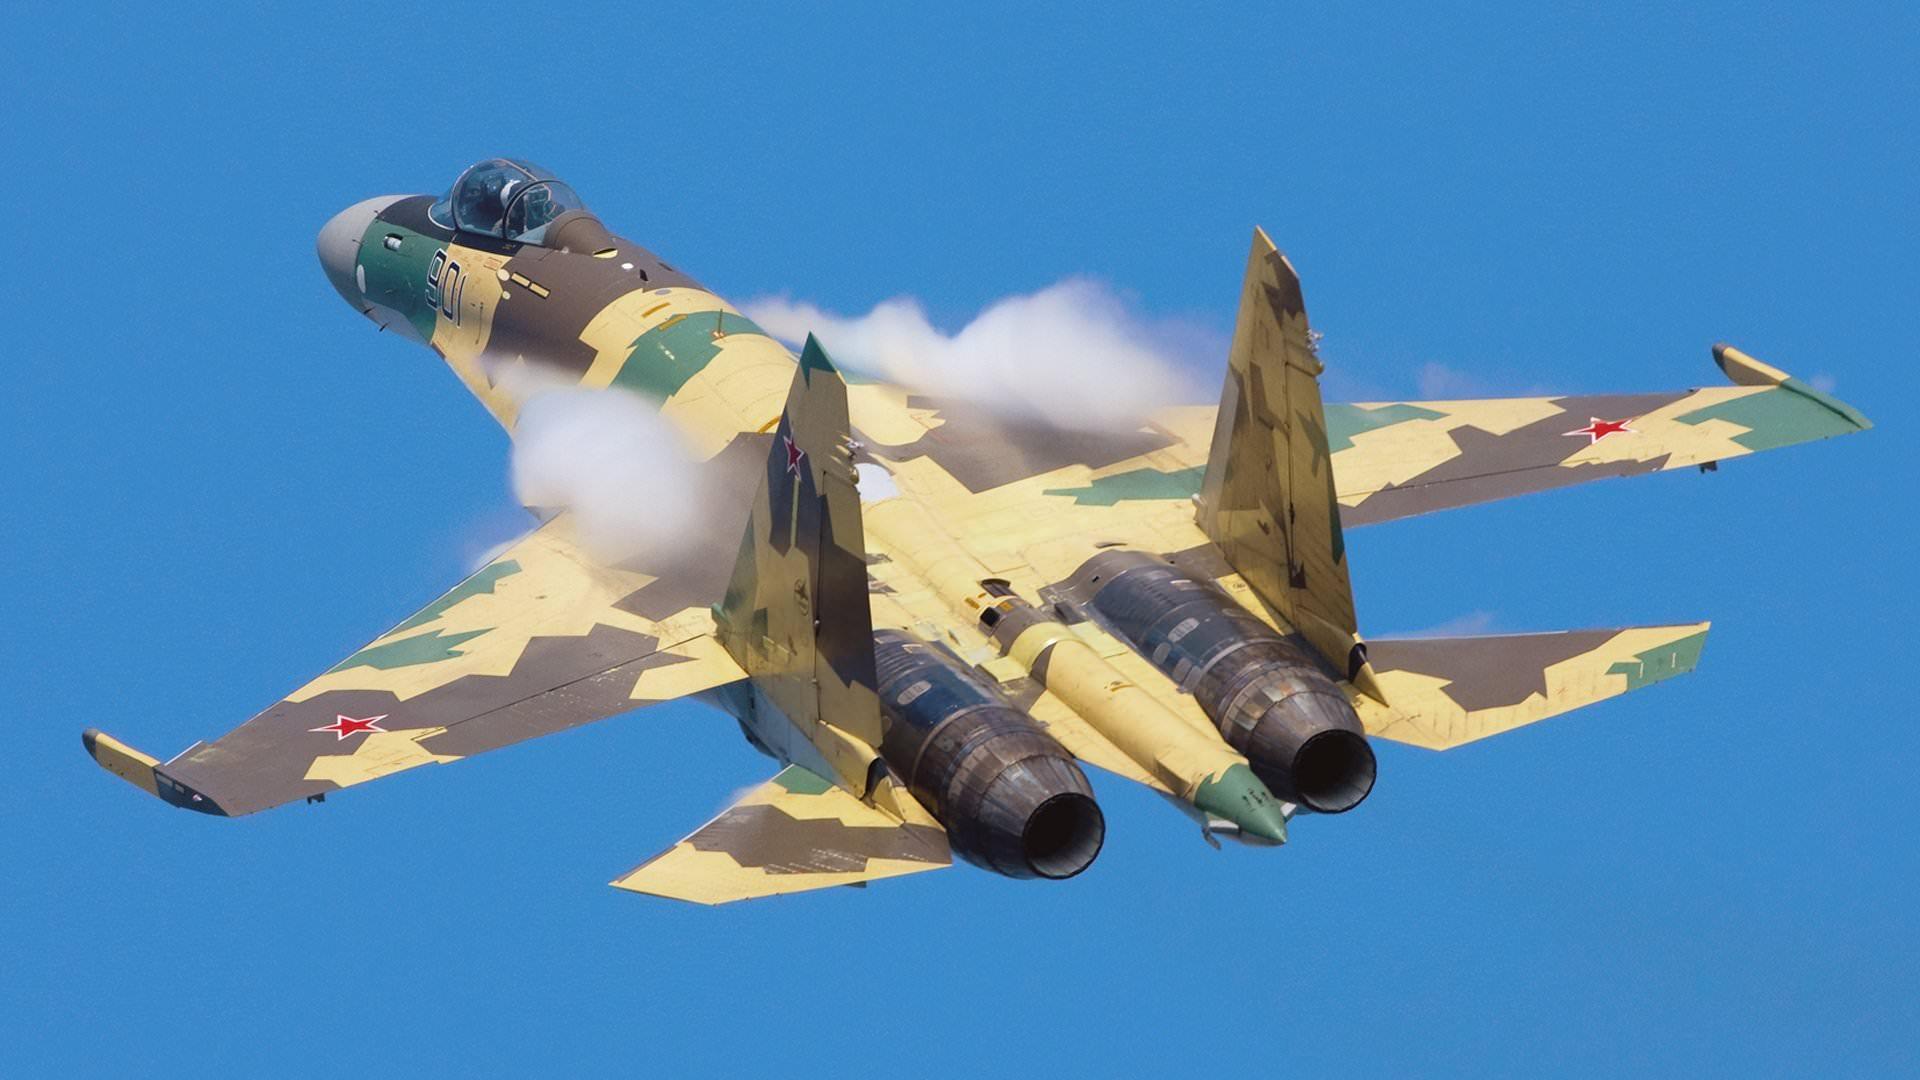 Awesome Sukhoi Su 35 Free Wallpaper For Full HD 1080p Computer